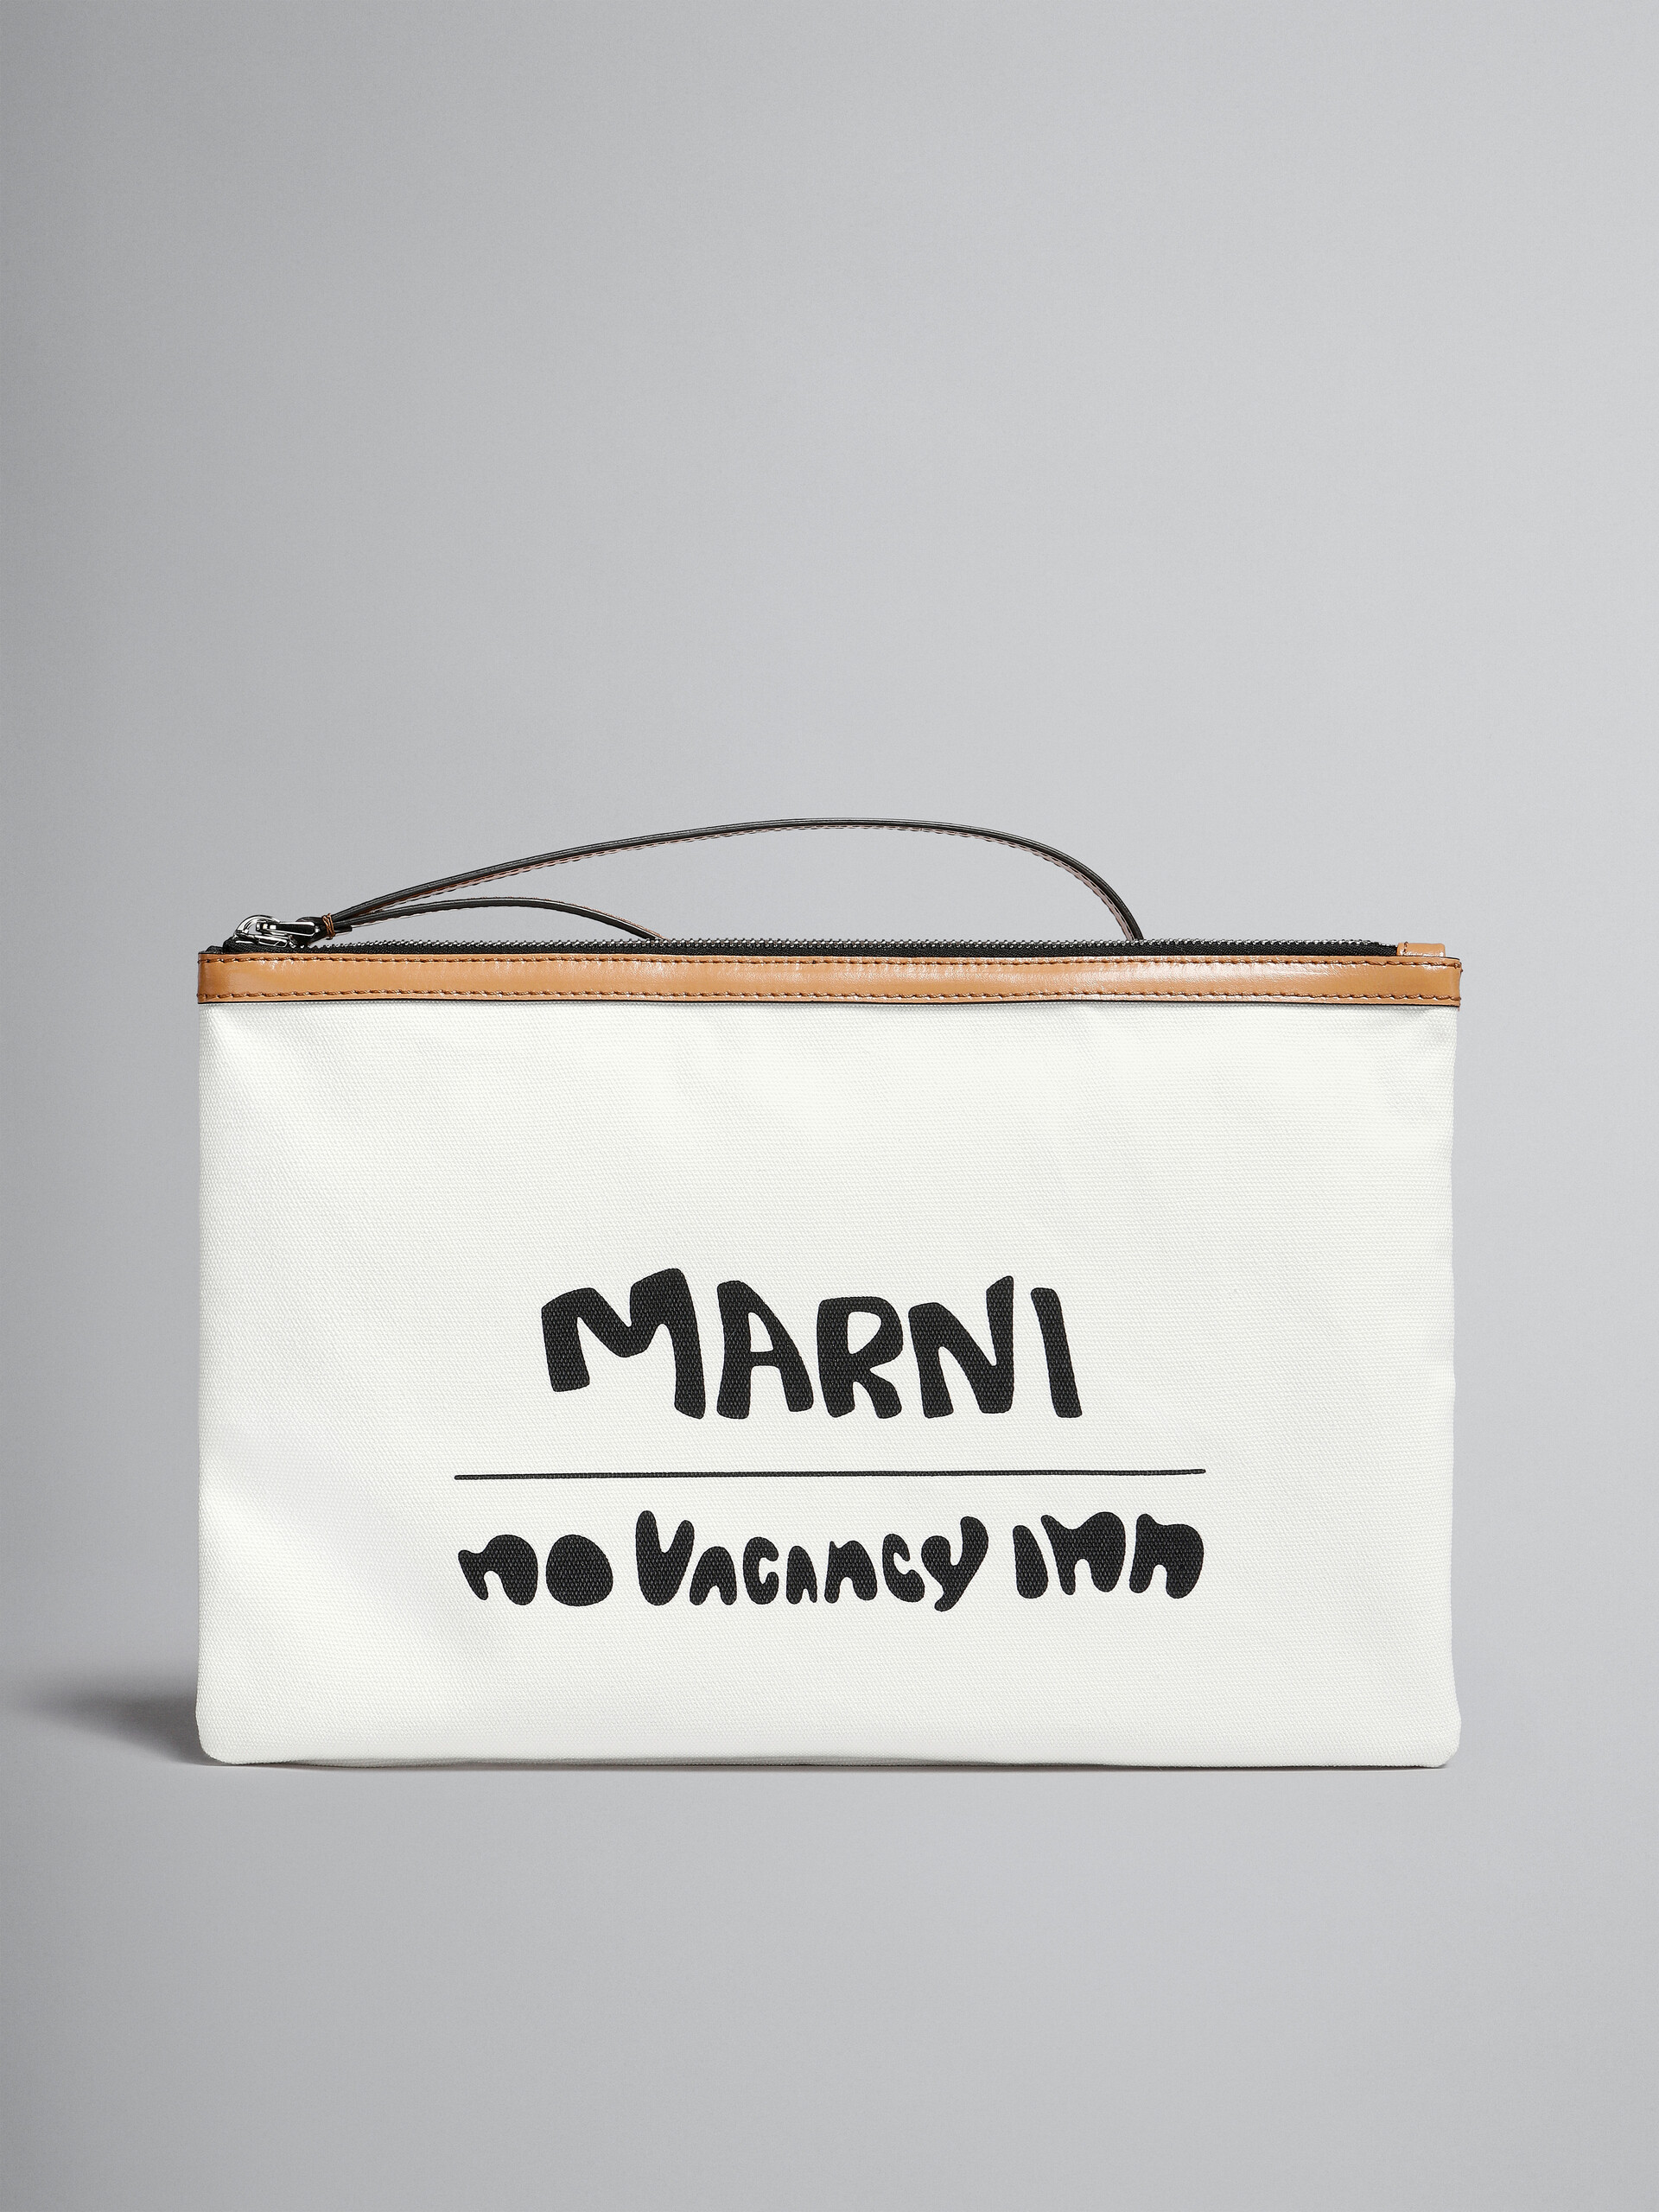 Marni x No Vacancy Inn - Bey Pouch in white canvas with beige trims - Pochette - Image 1